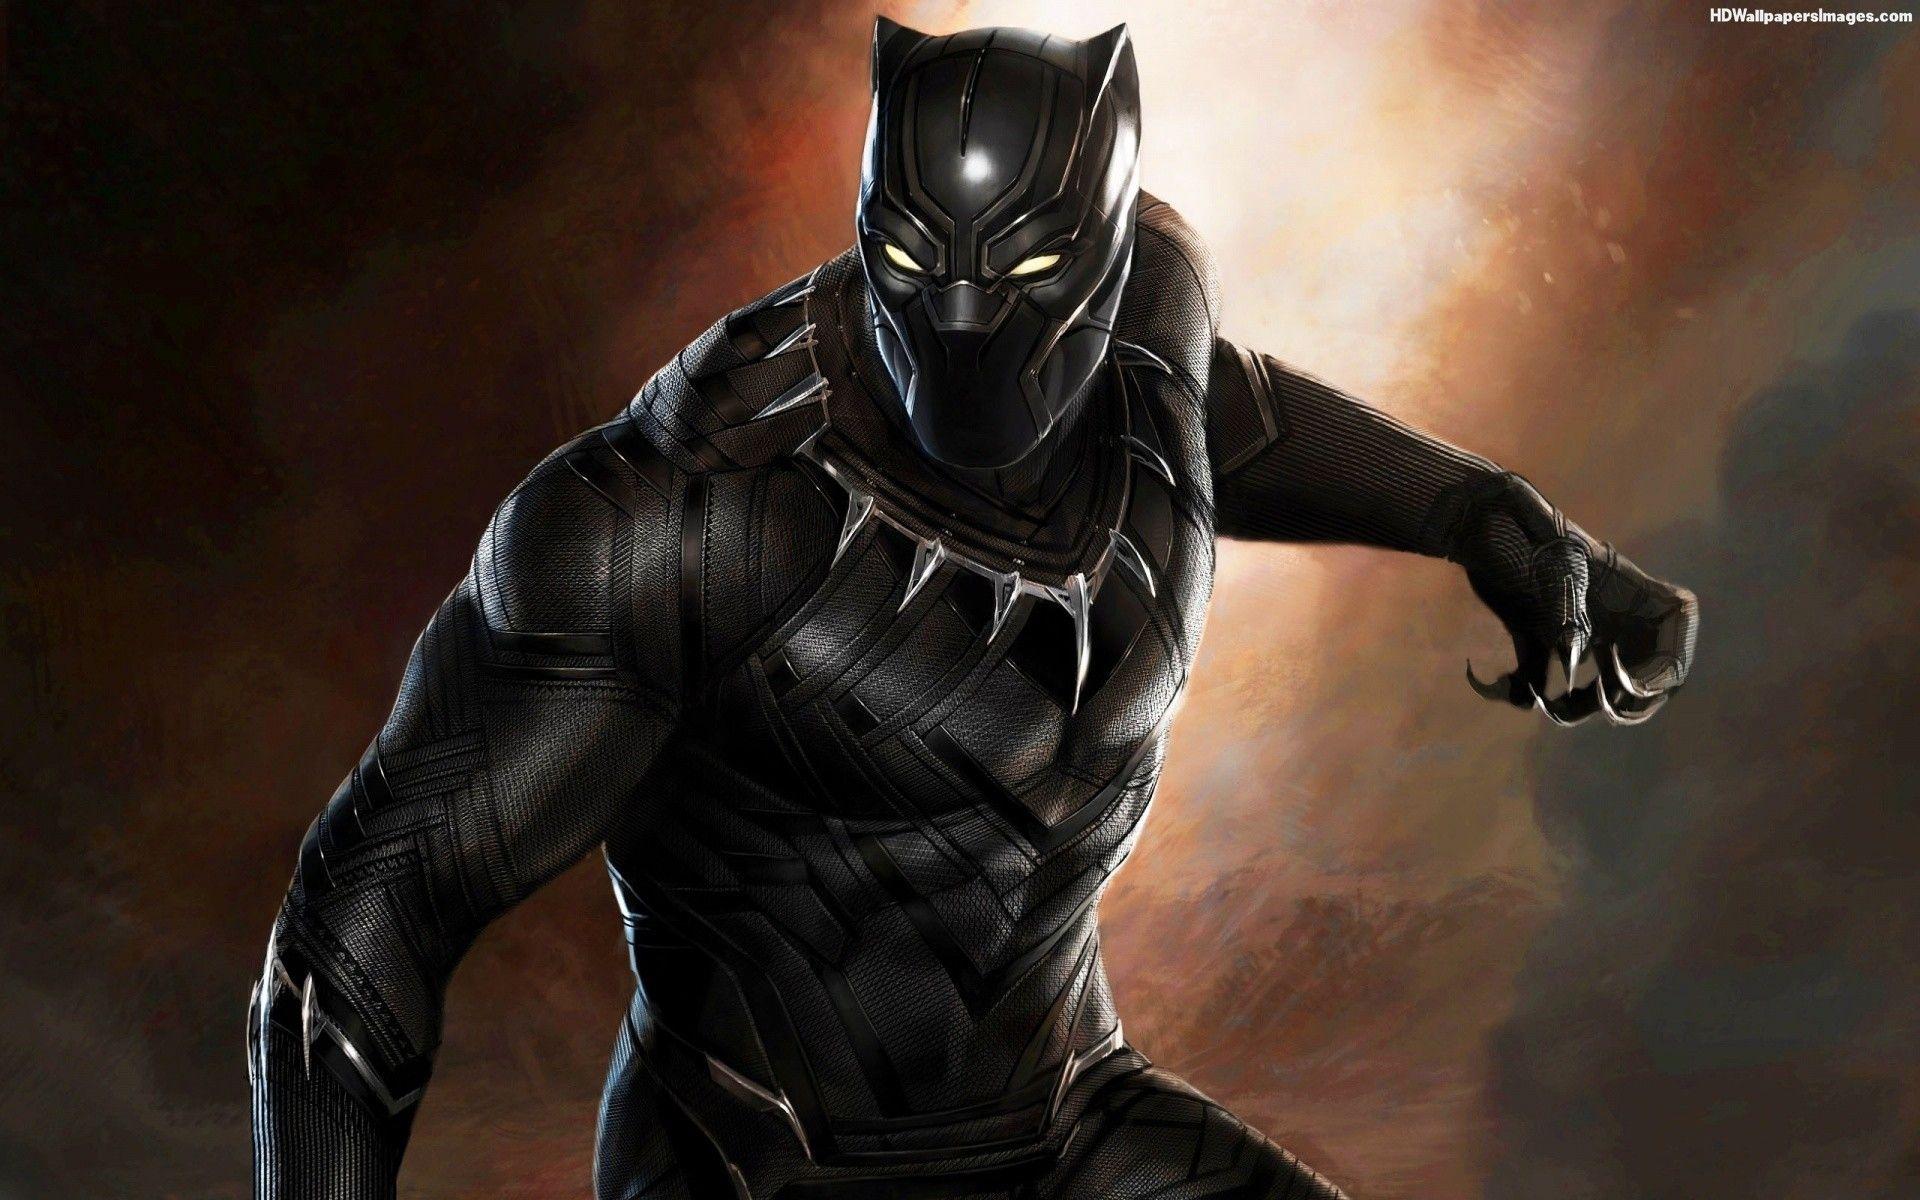 Black Panther Storyline Has Been Revealed And It's AWESOME